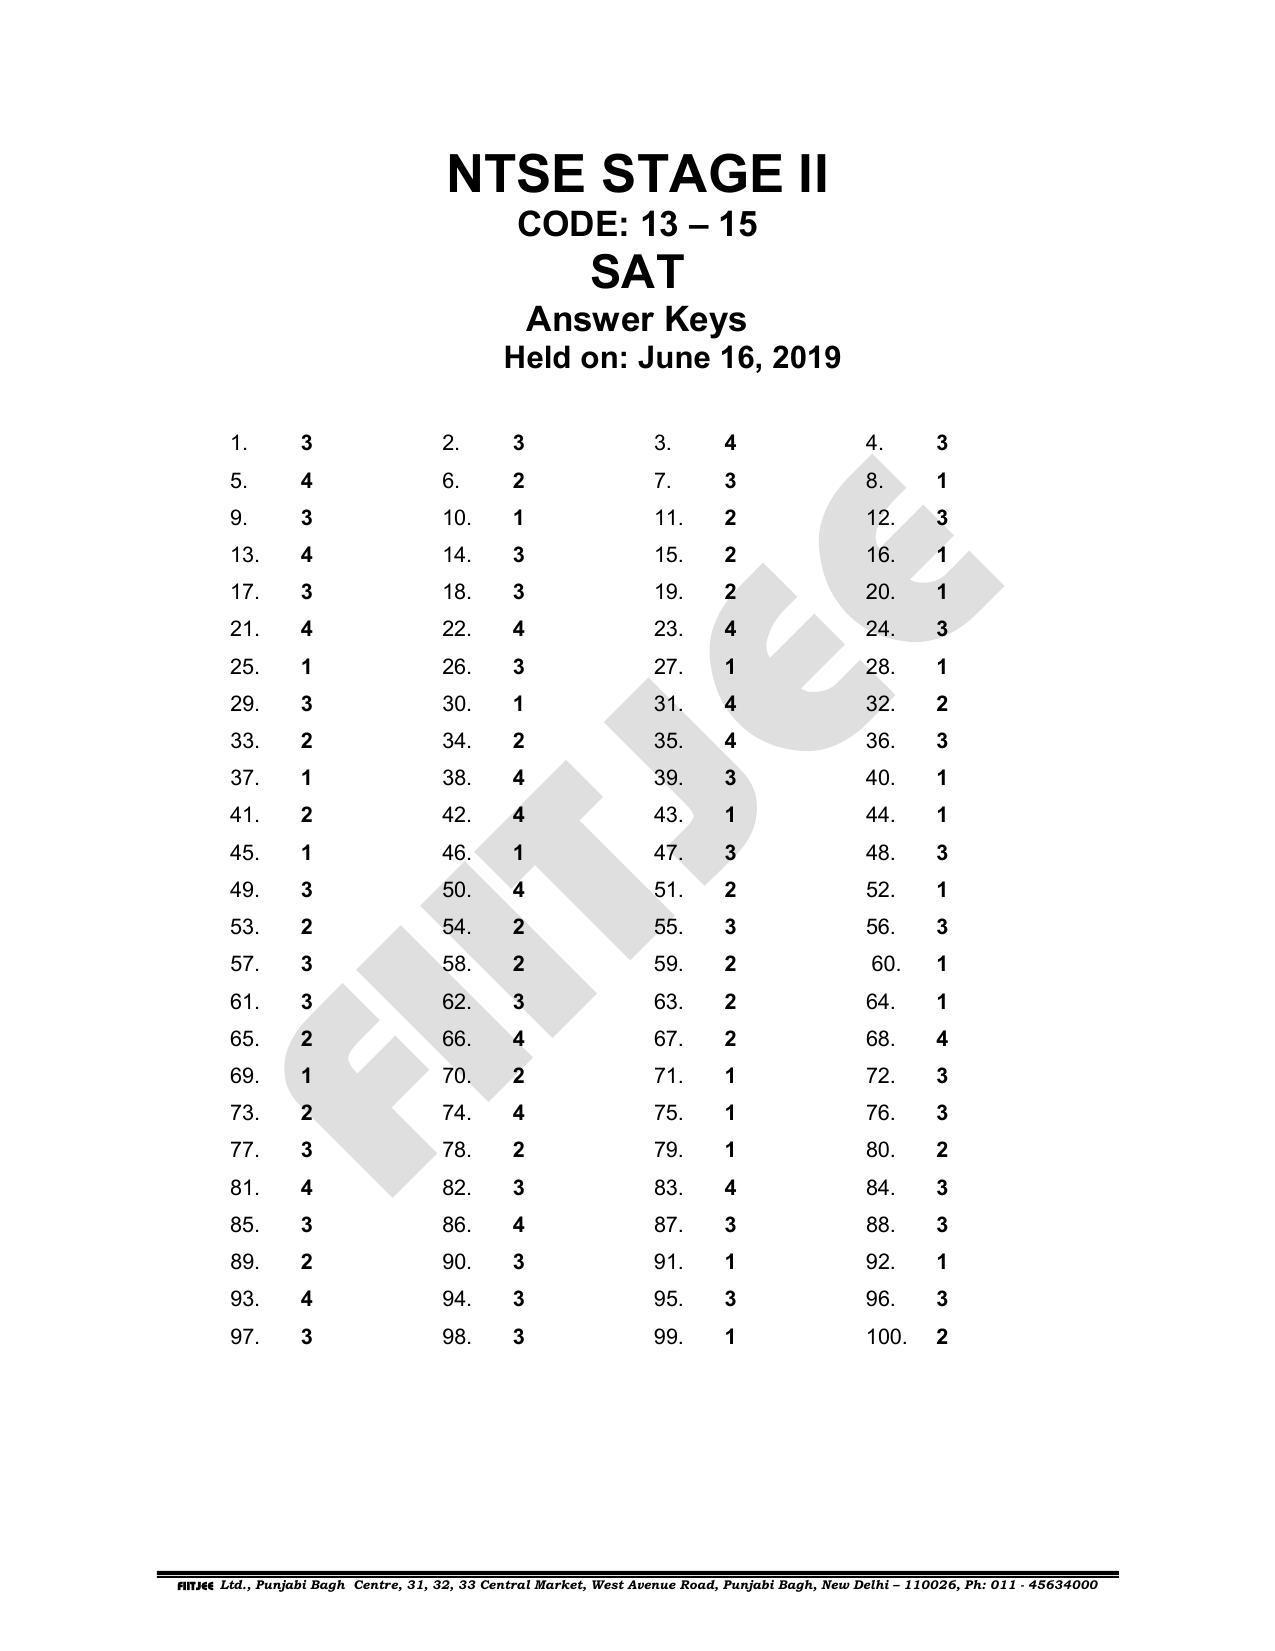 NTSE 2019 (Stage II) SAT Paper with Solution (June 16, 2019) - Page 1